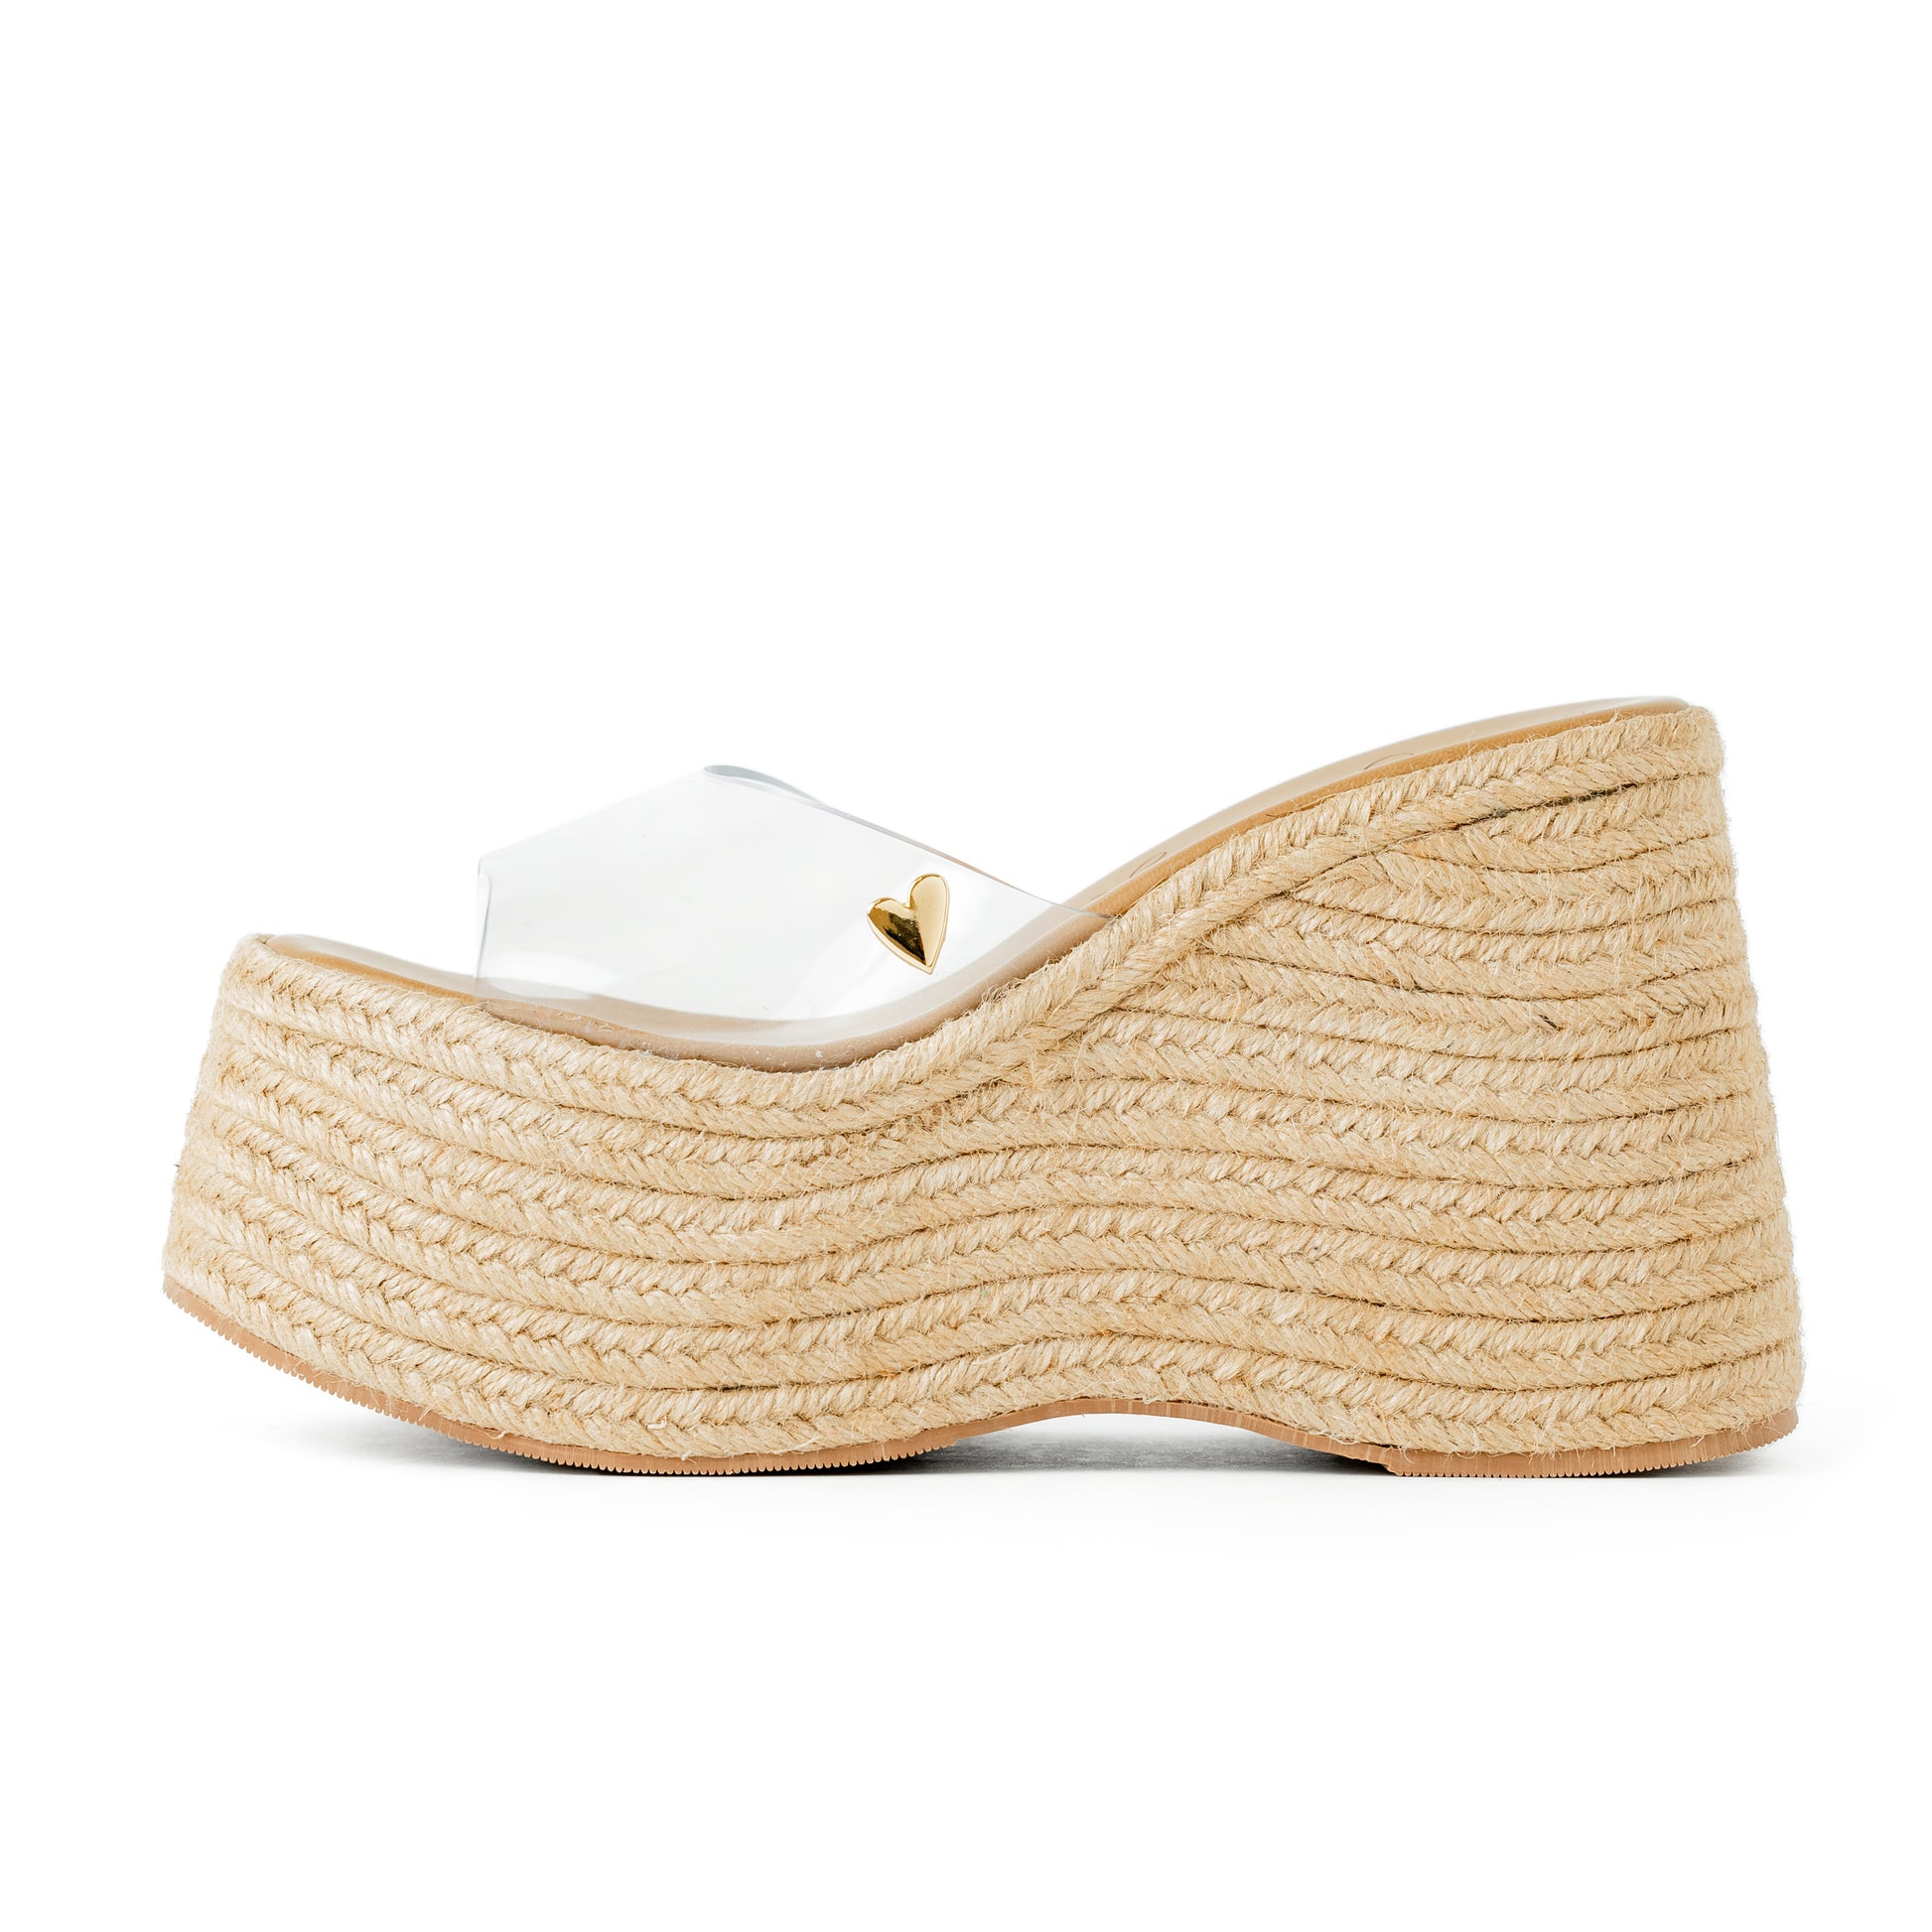 Emma Espadrilles by Nataly Mendez FEATURES  Squared tip Vinyl upper material Genuine leather insole lining Flexible rubber sole Handmade 4.5 inch high heel 2.4 inch platform